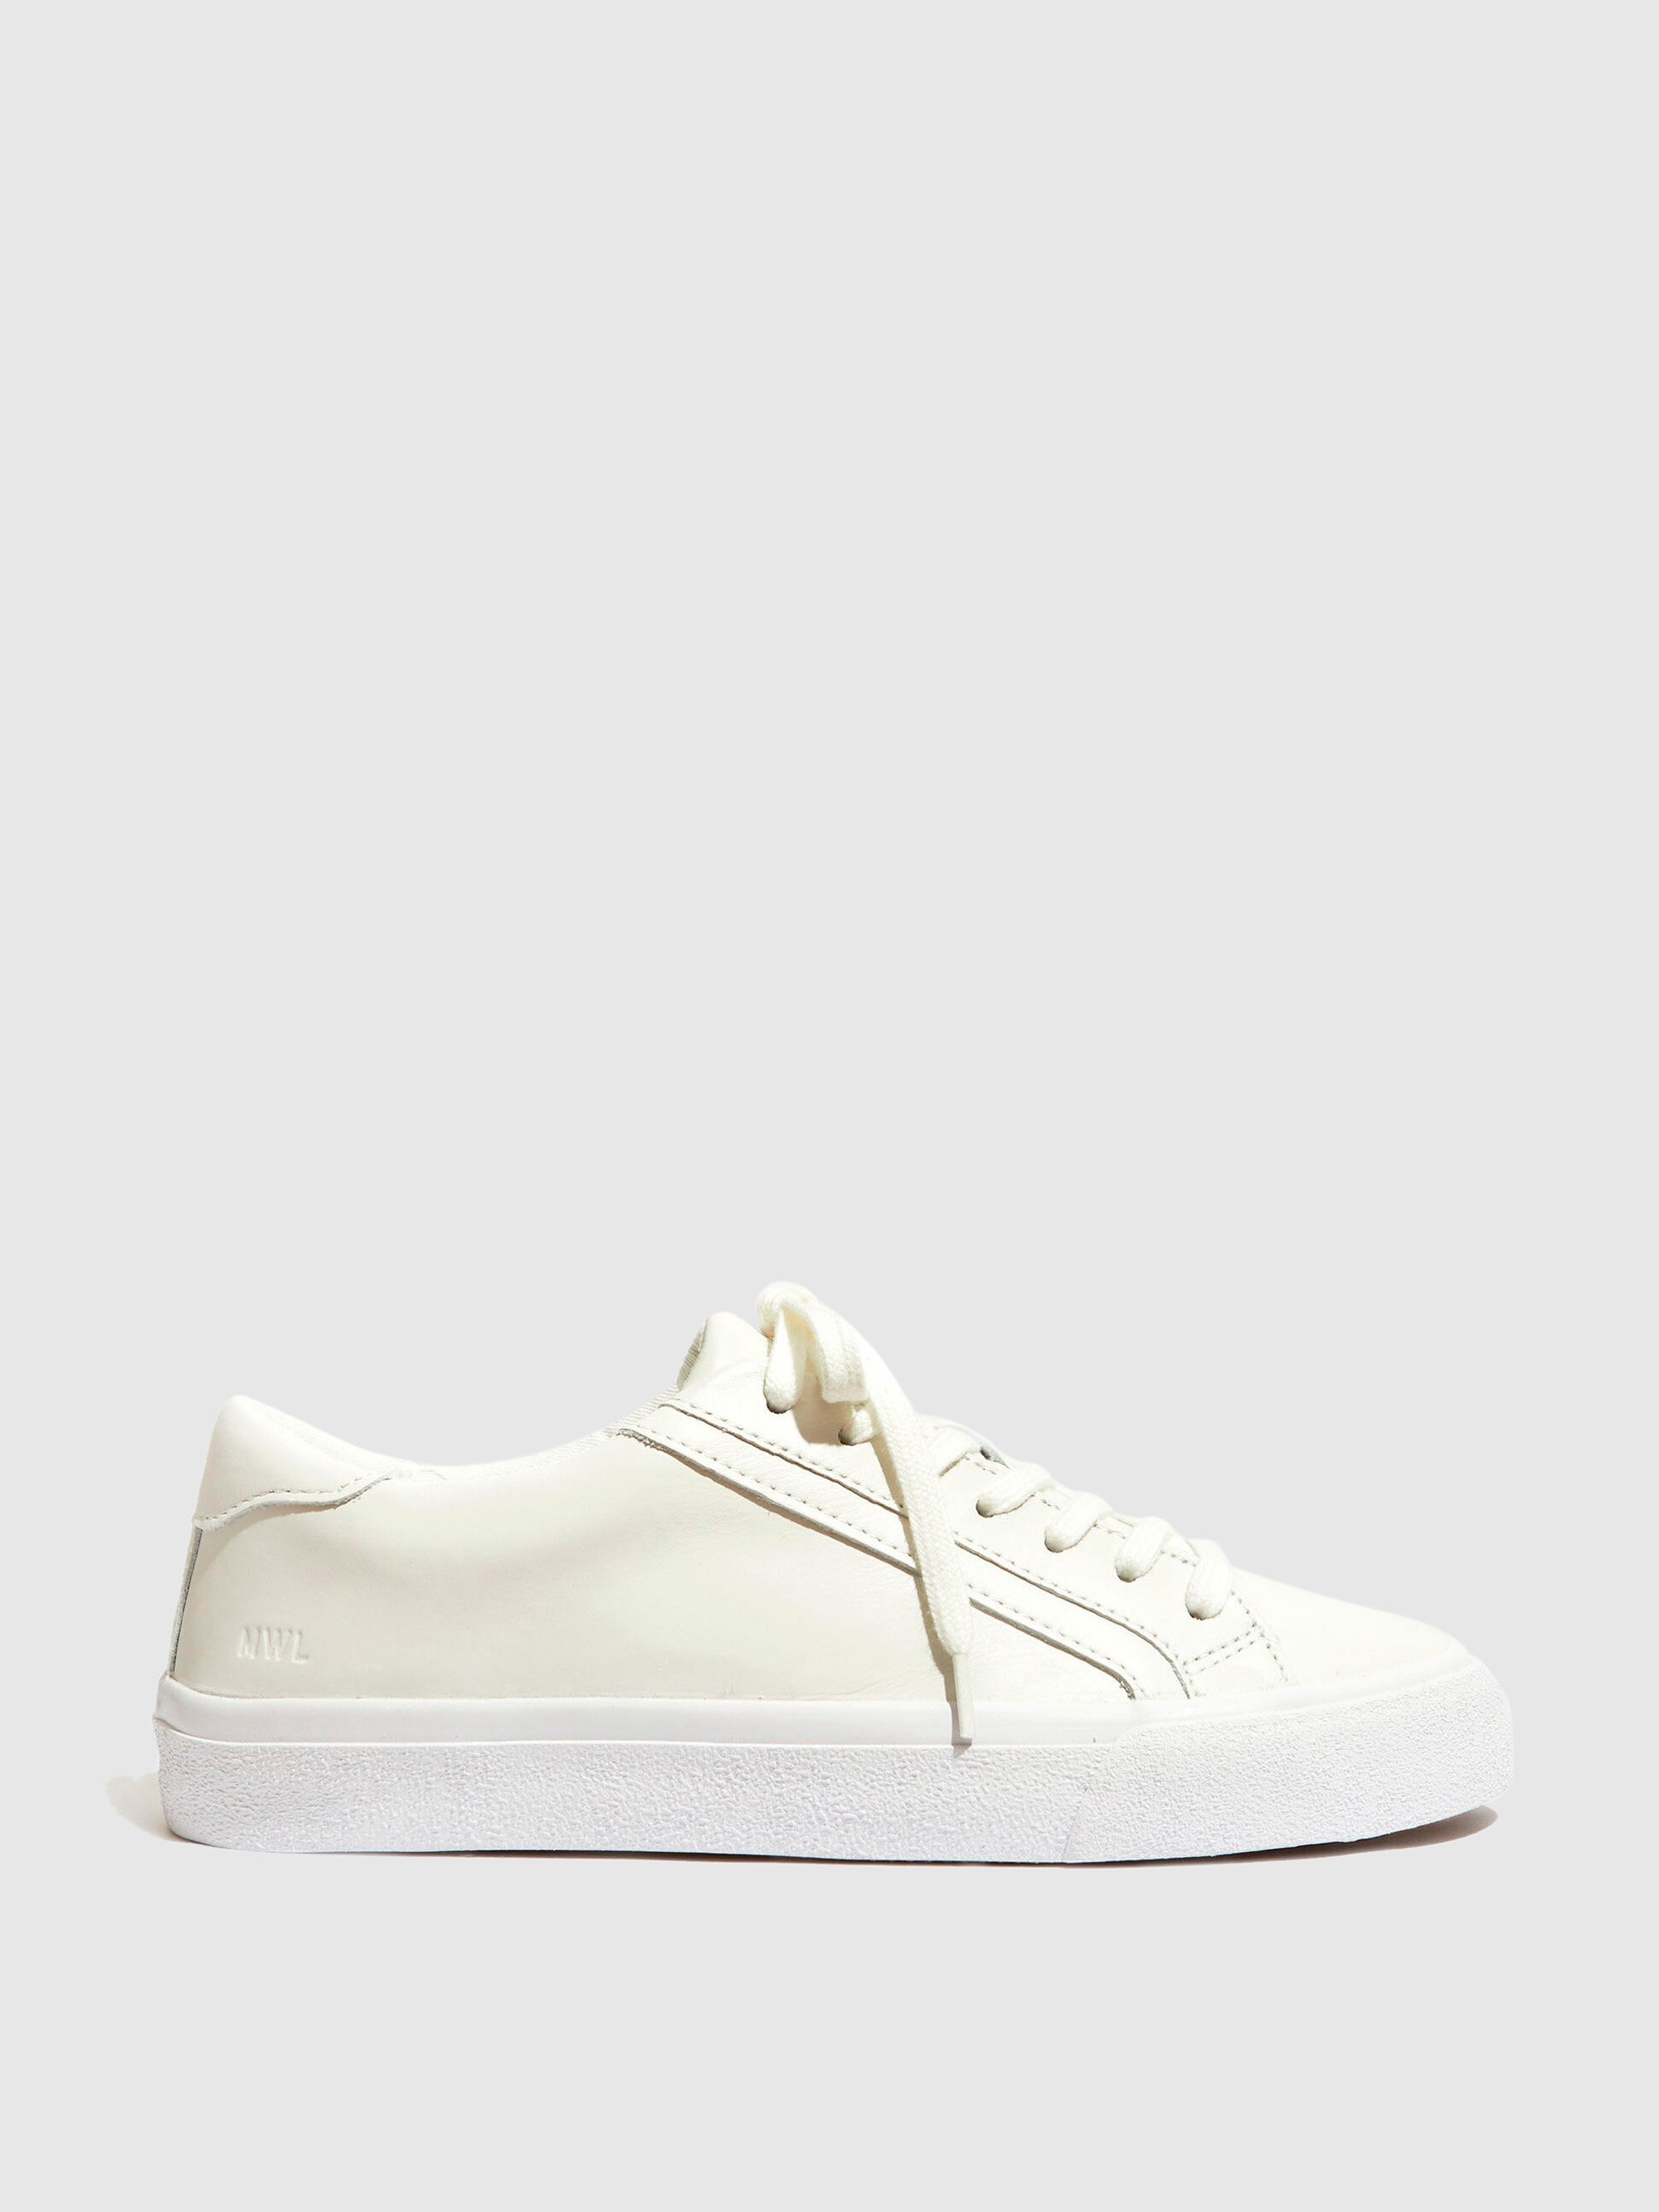 madewell white leather sneakers